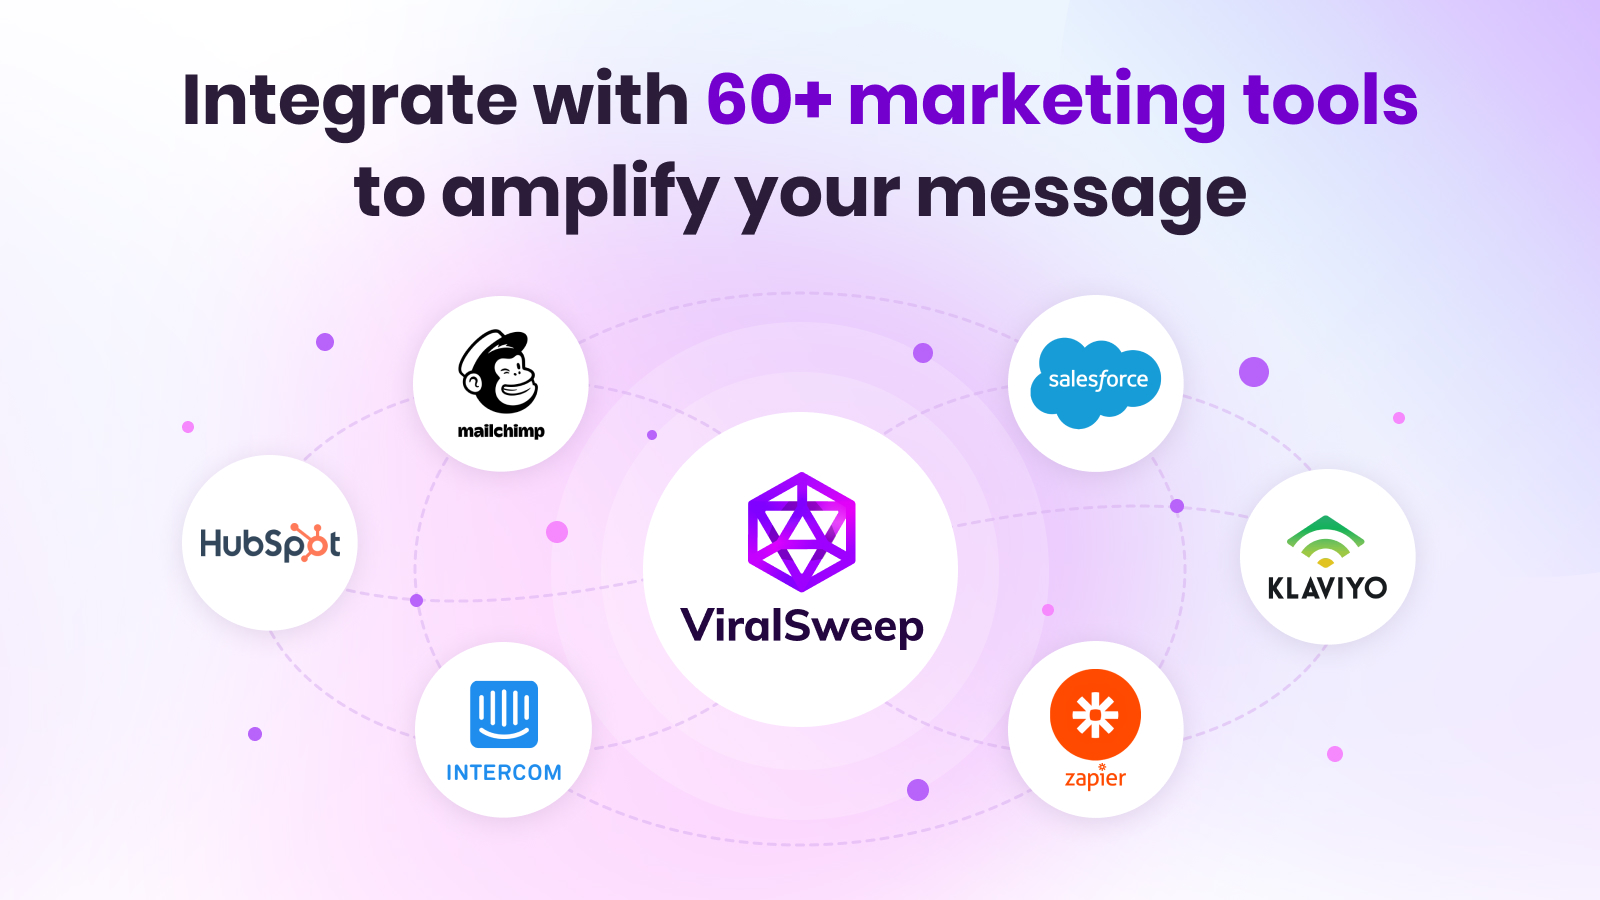 ViralSweep integrates with all of your favorite marketing tools (over 50+ direct integrations) including Zapier which can connect you to hundreds of other apps.